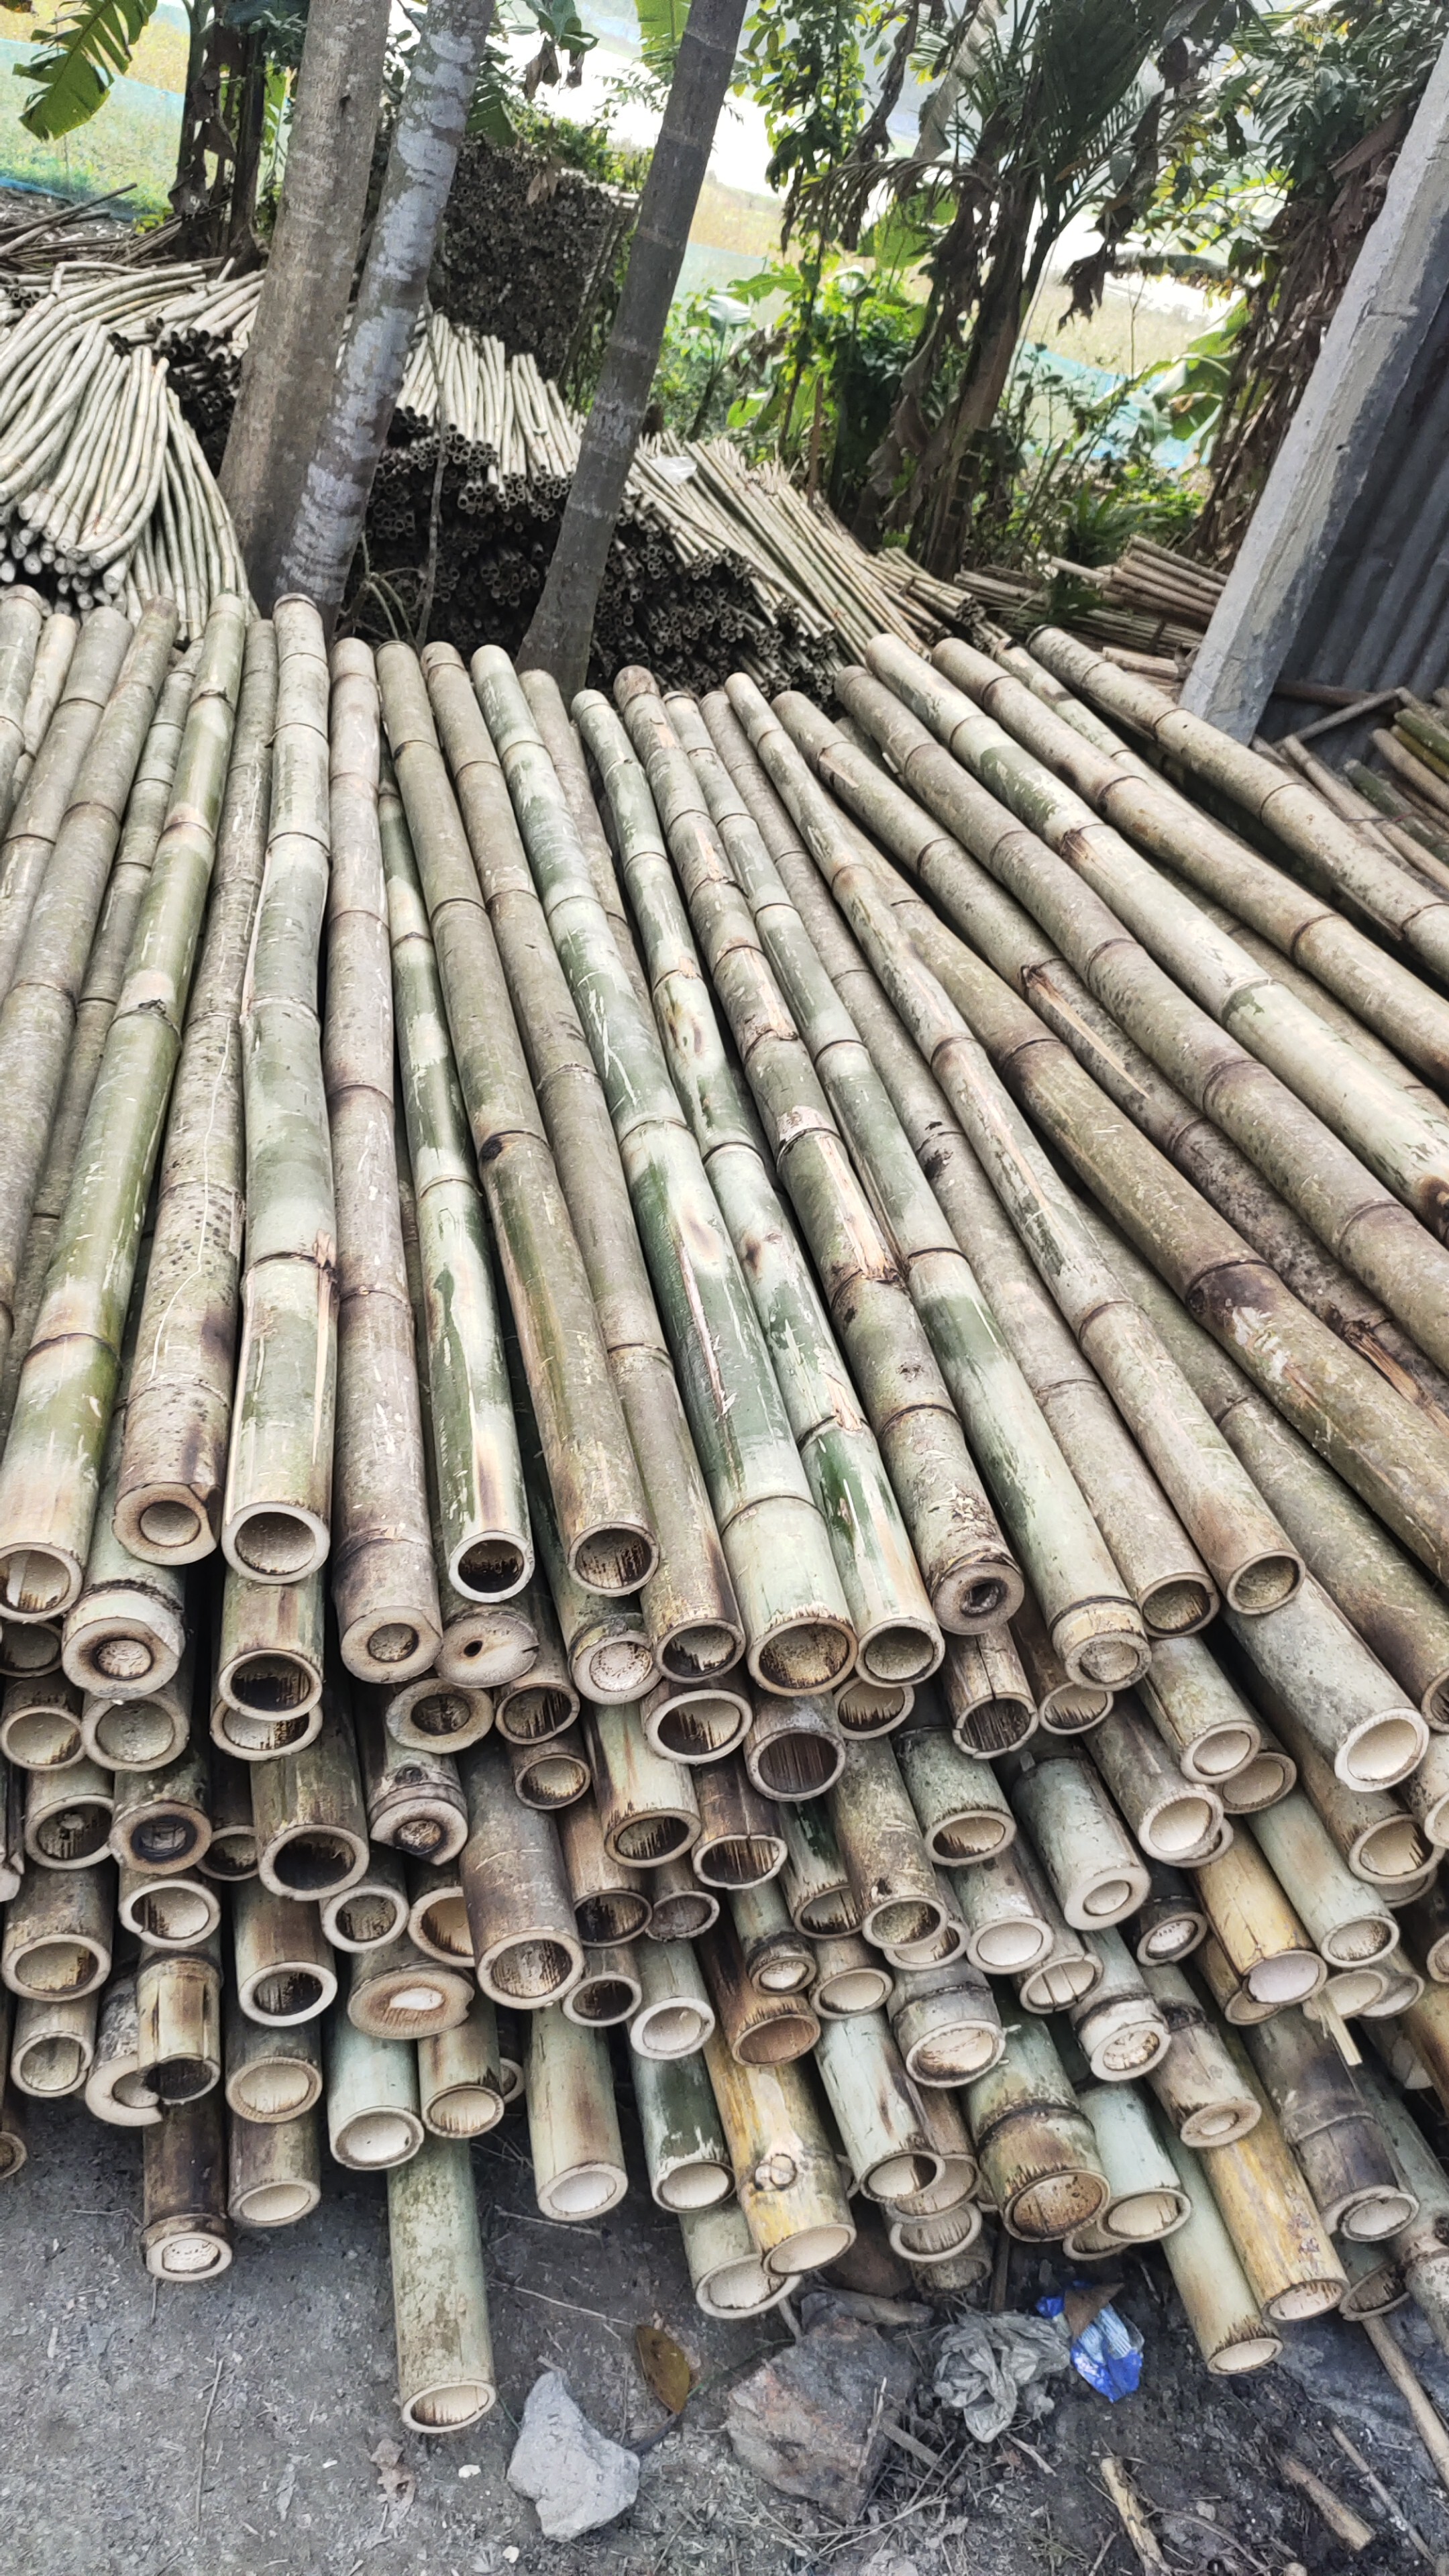 All kinds of bamboo sticks for plantation